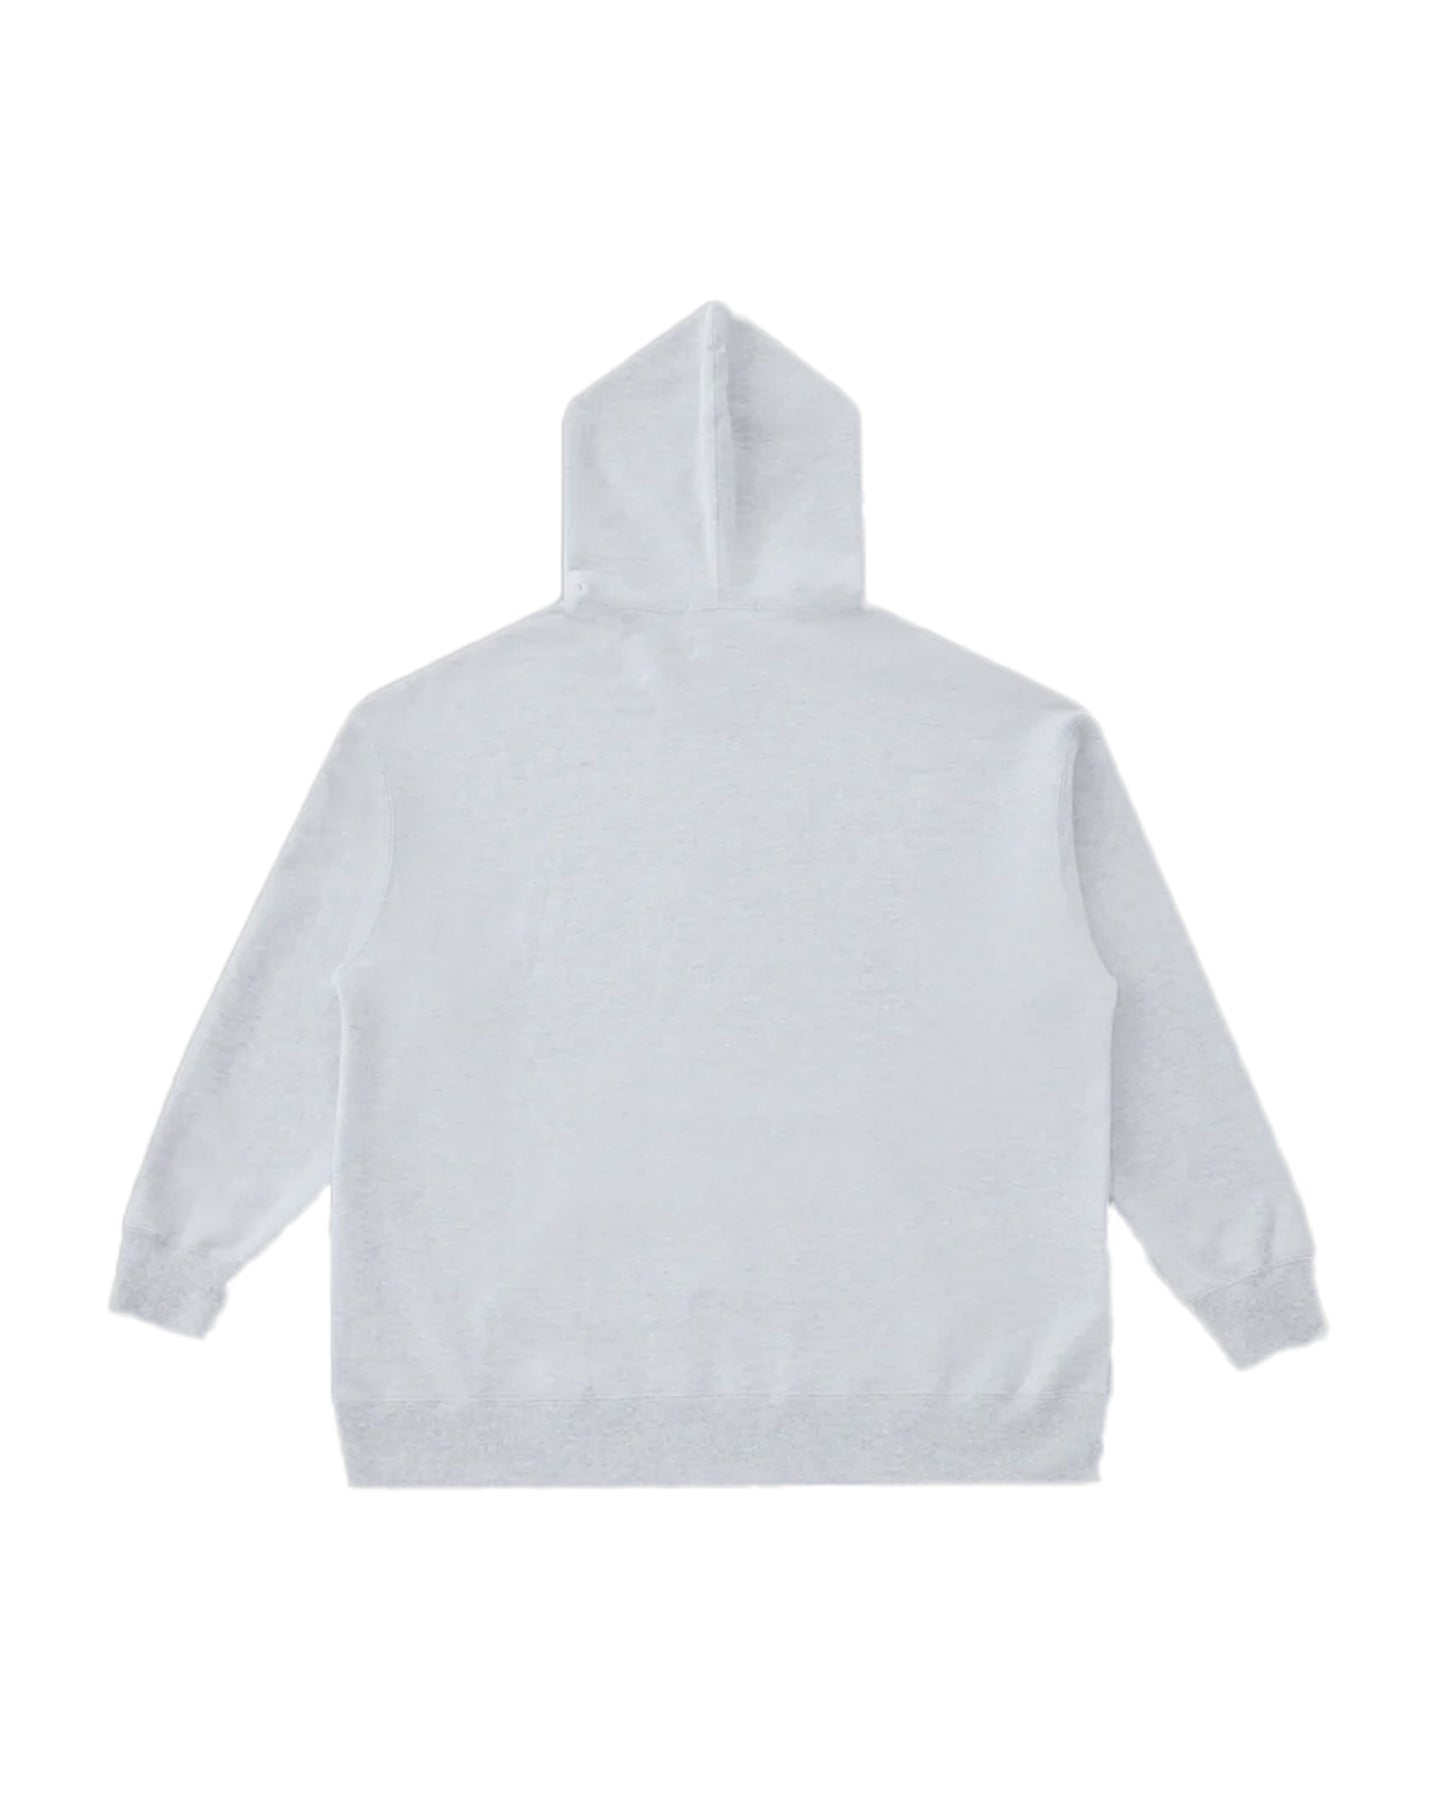 ALWAYS OUT OF STOCK X REYN SPOONER SHOELACE PULLOVER